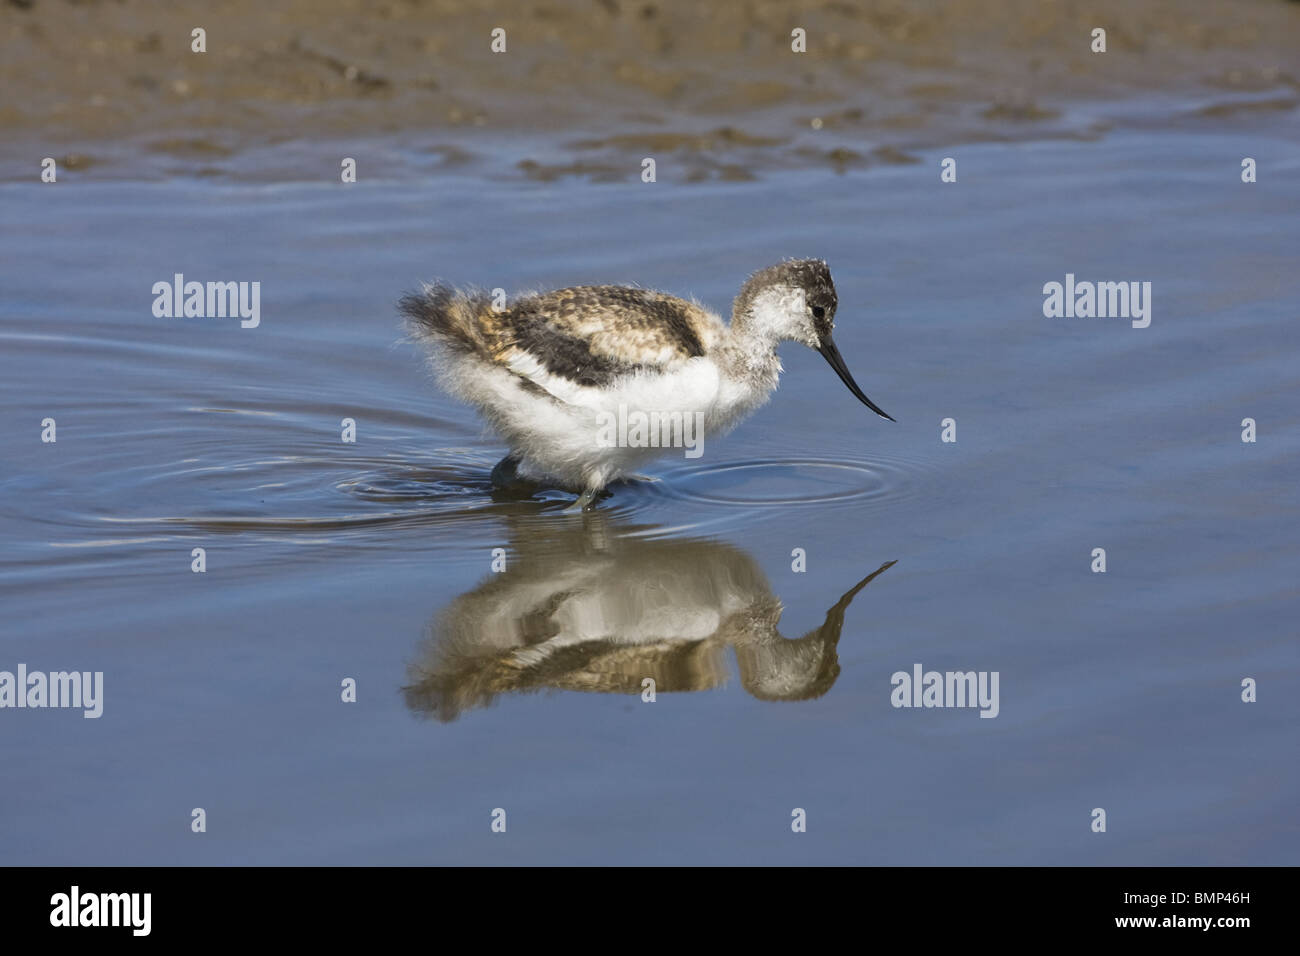 YOUNG AVOCET CHICK Stock Photo